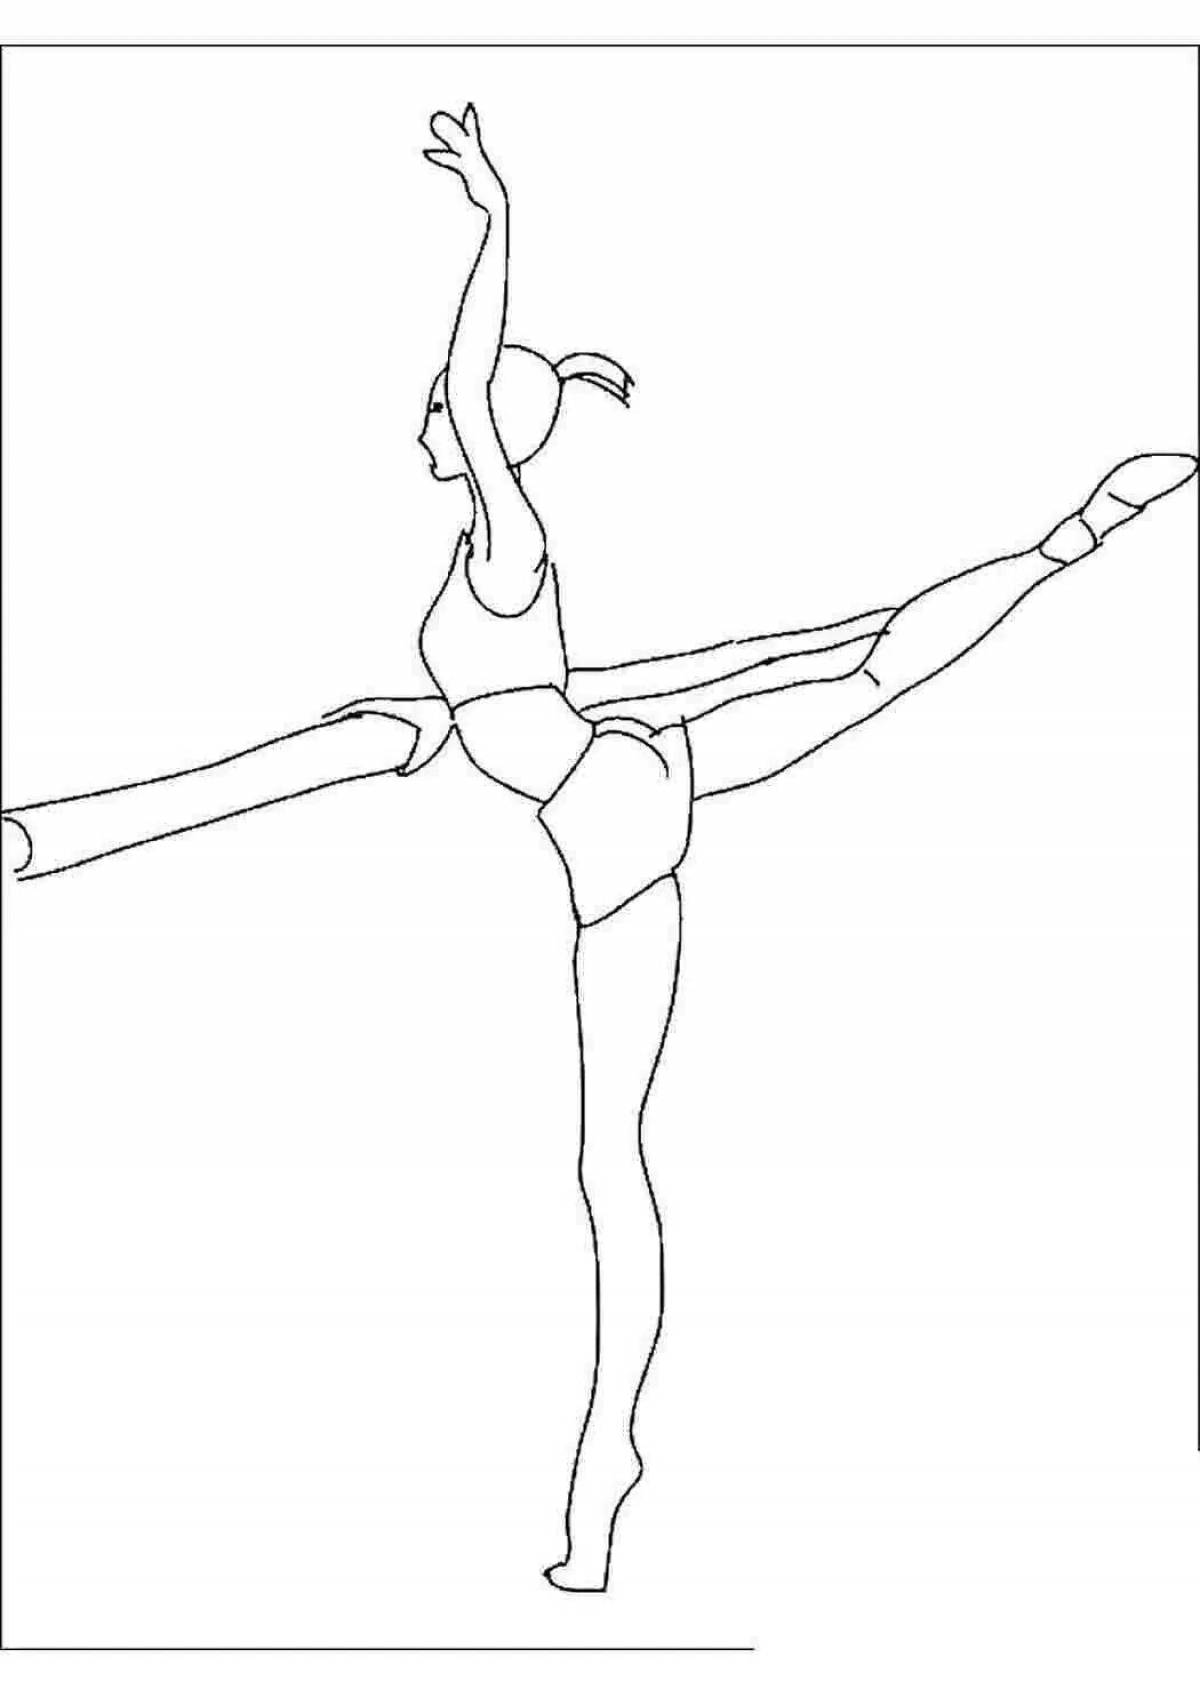 Coloring page inspired gymnasts